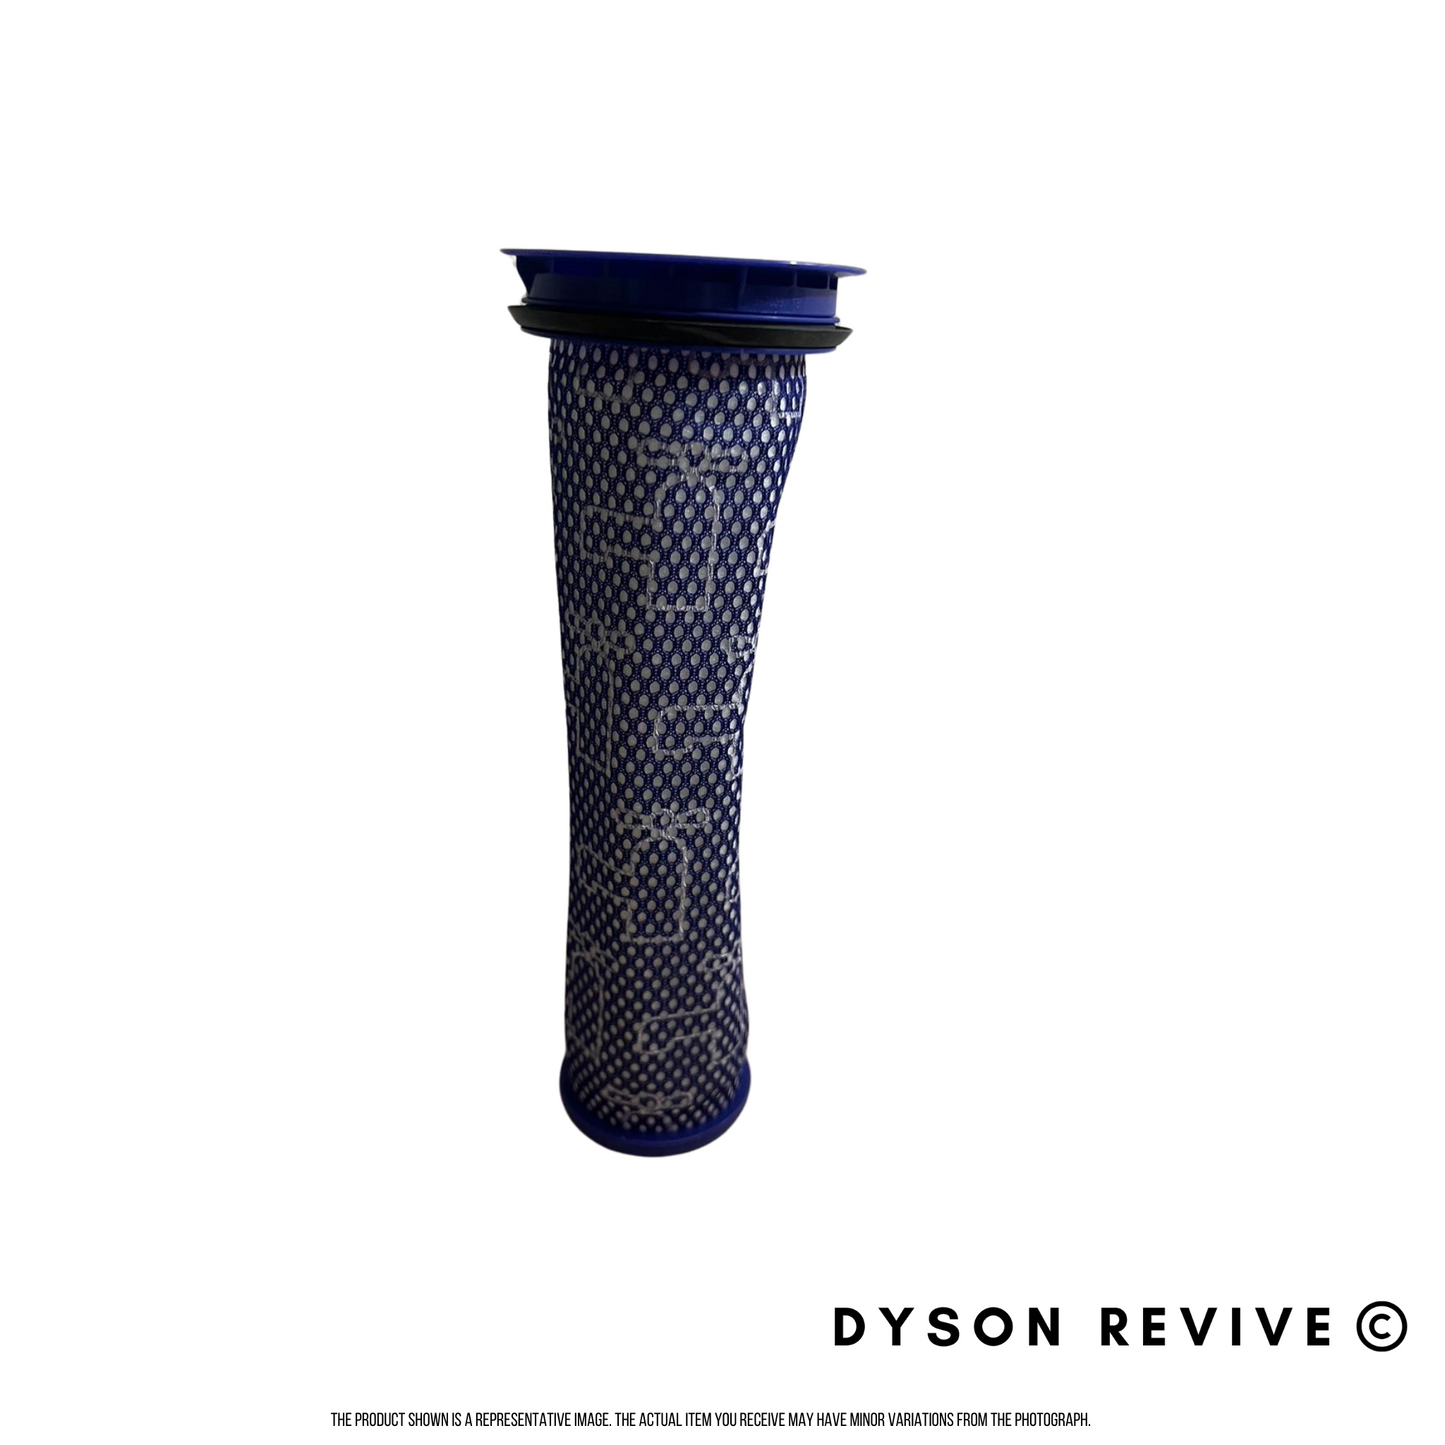 Genuine Dyson Pre-Filter Assembly Part Number 920640-01 for DC65 DC41